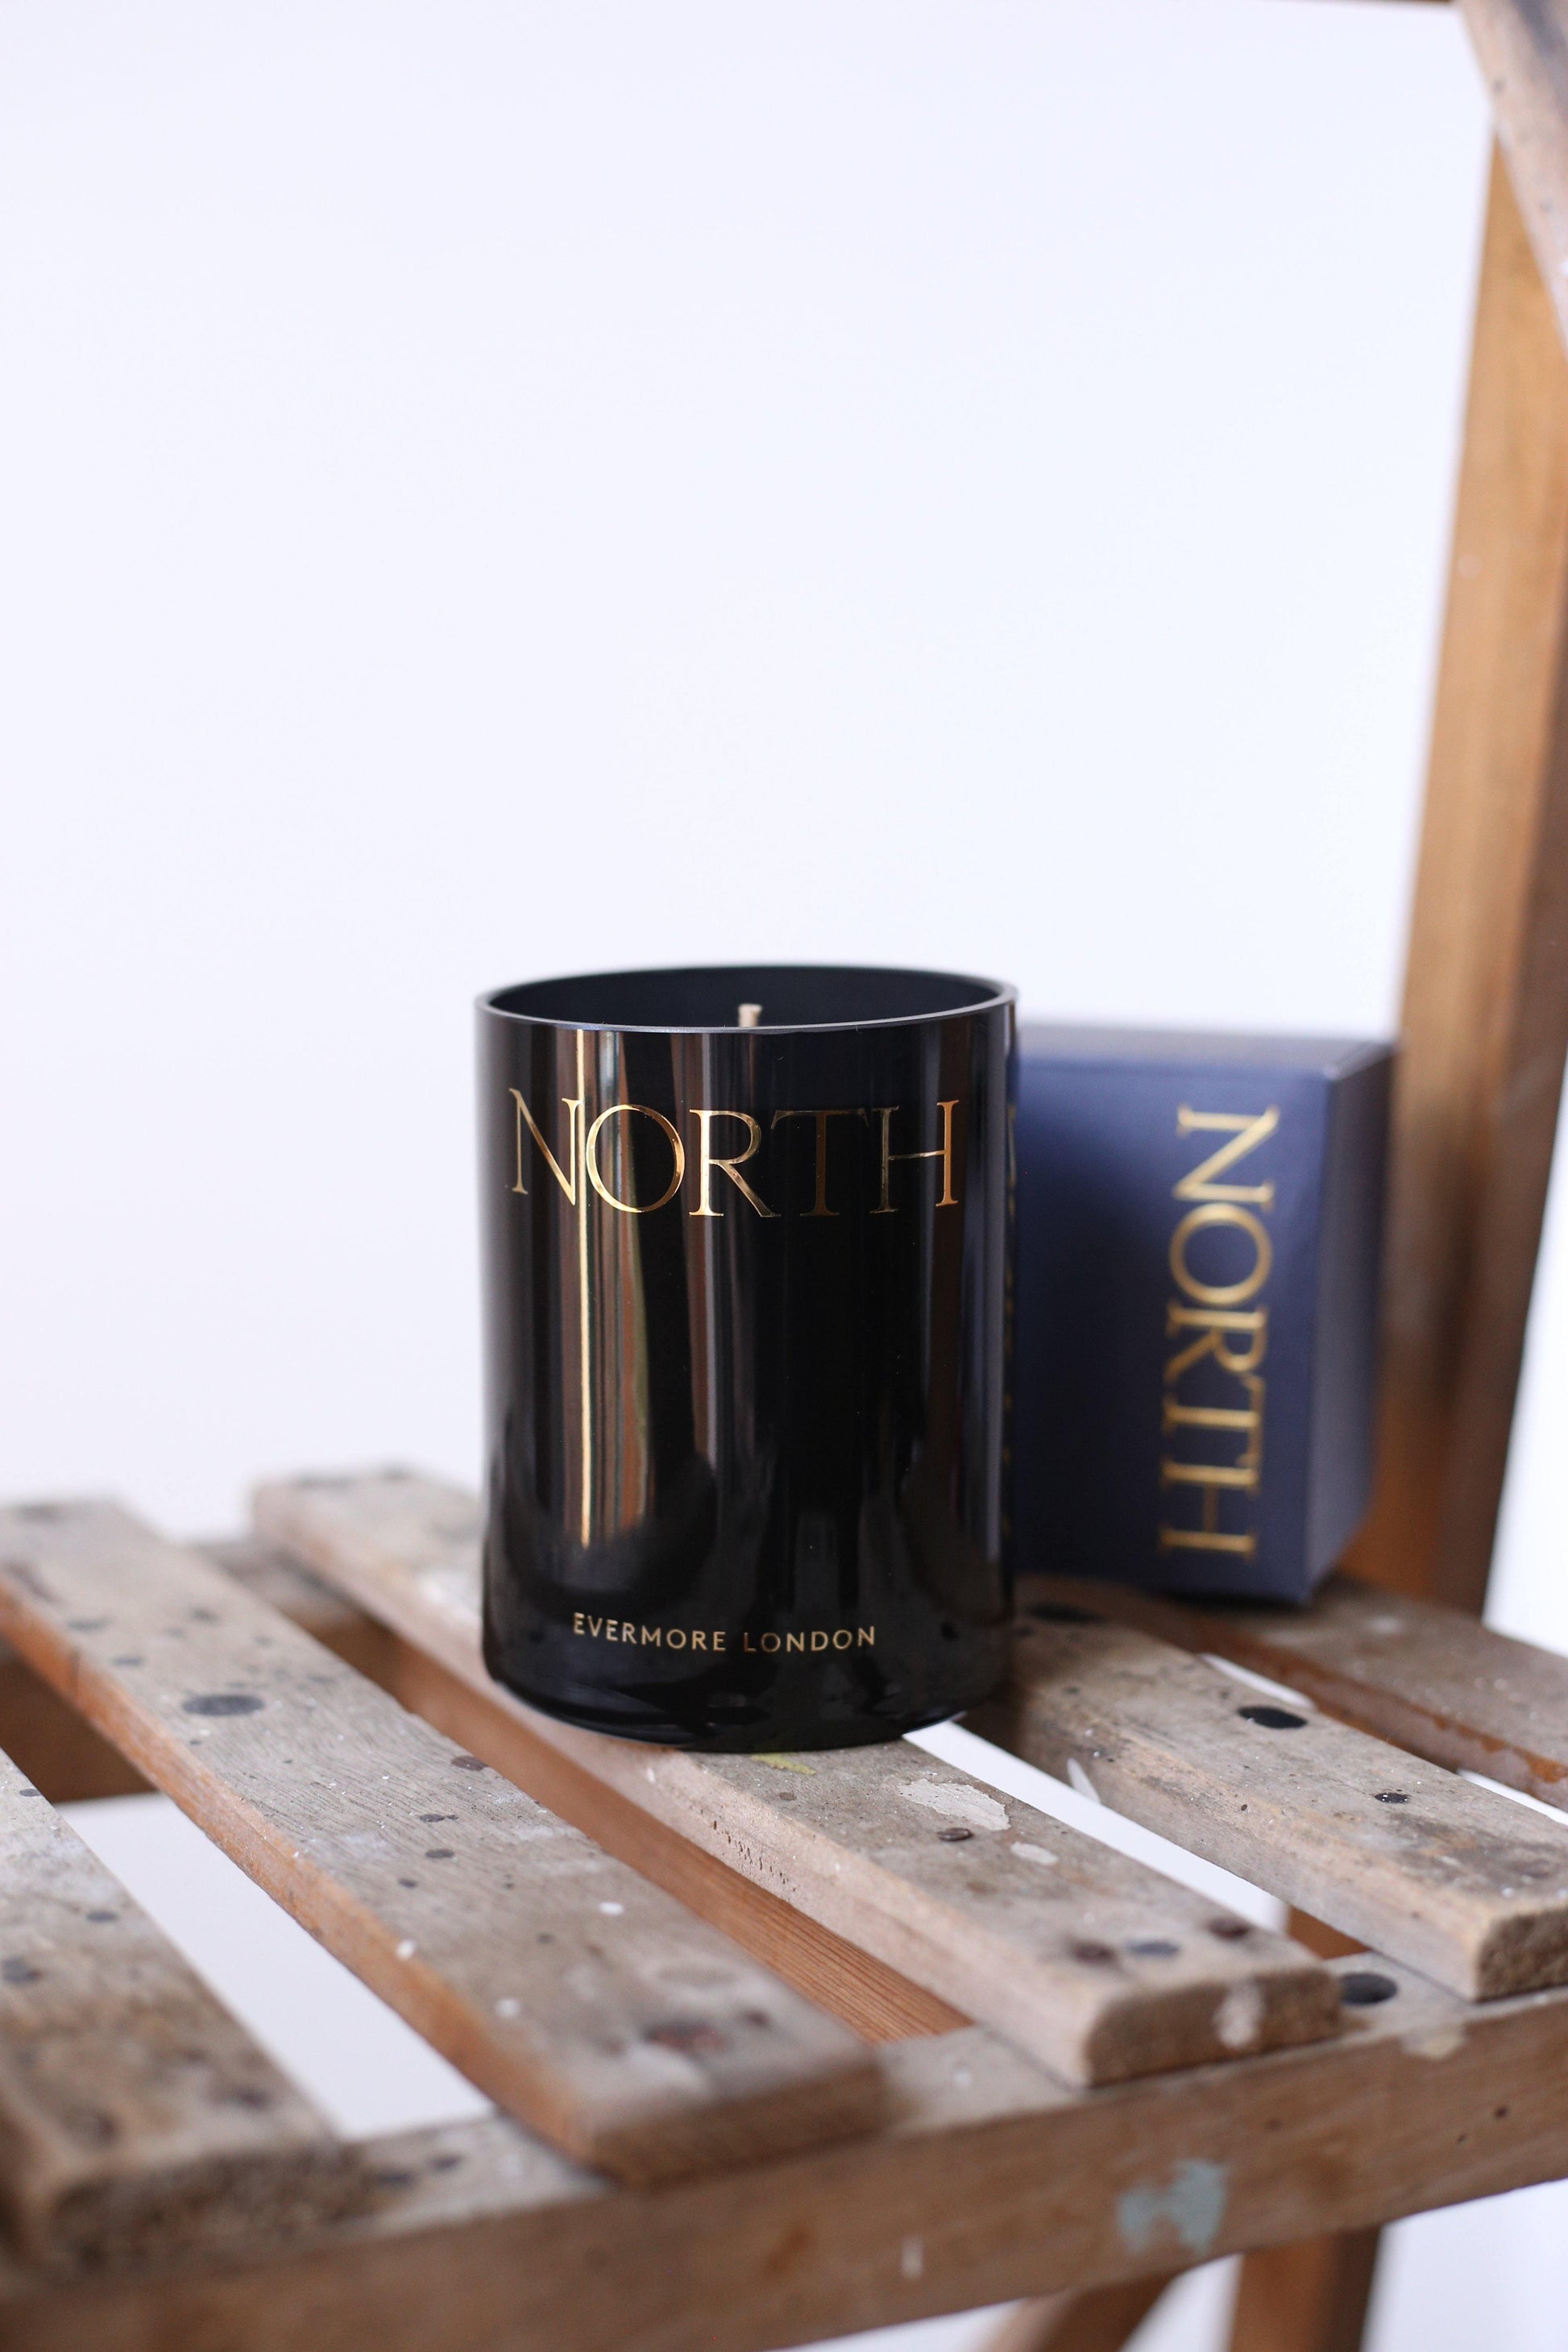 evermore london north candle